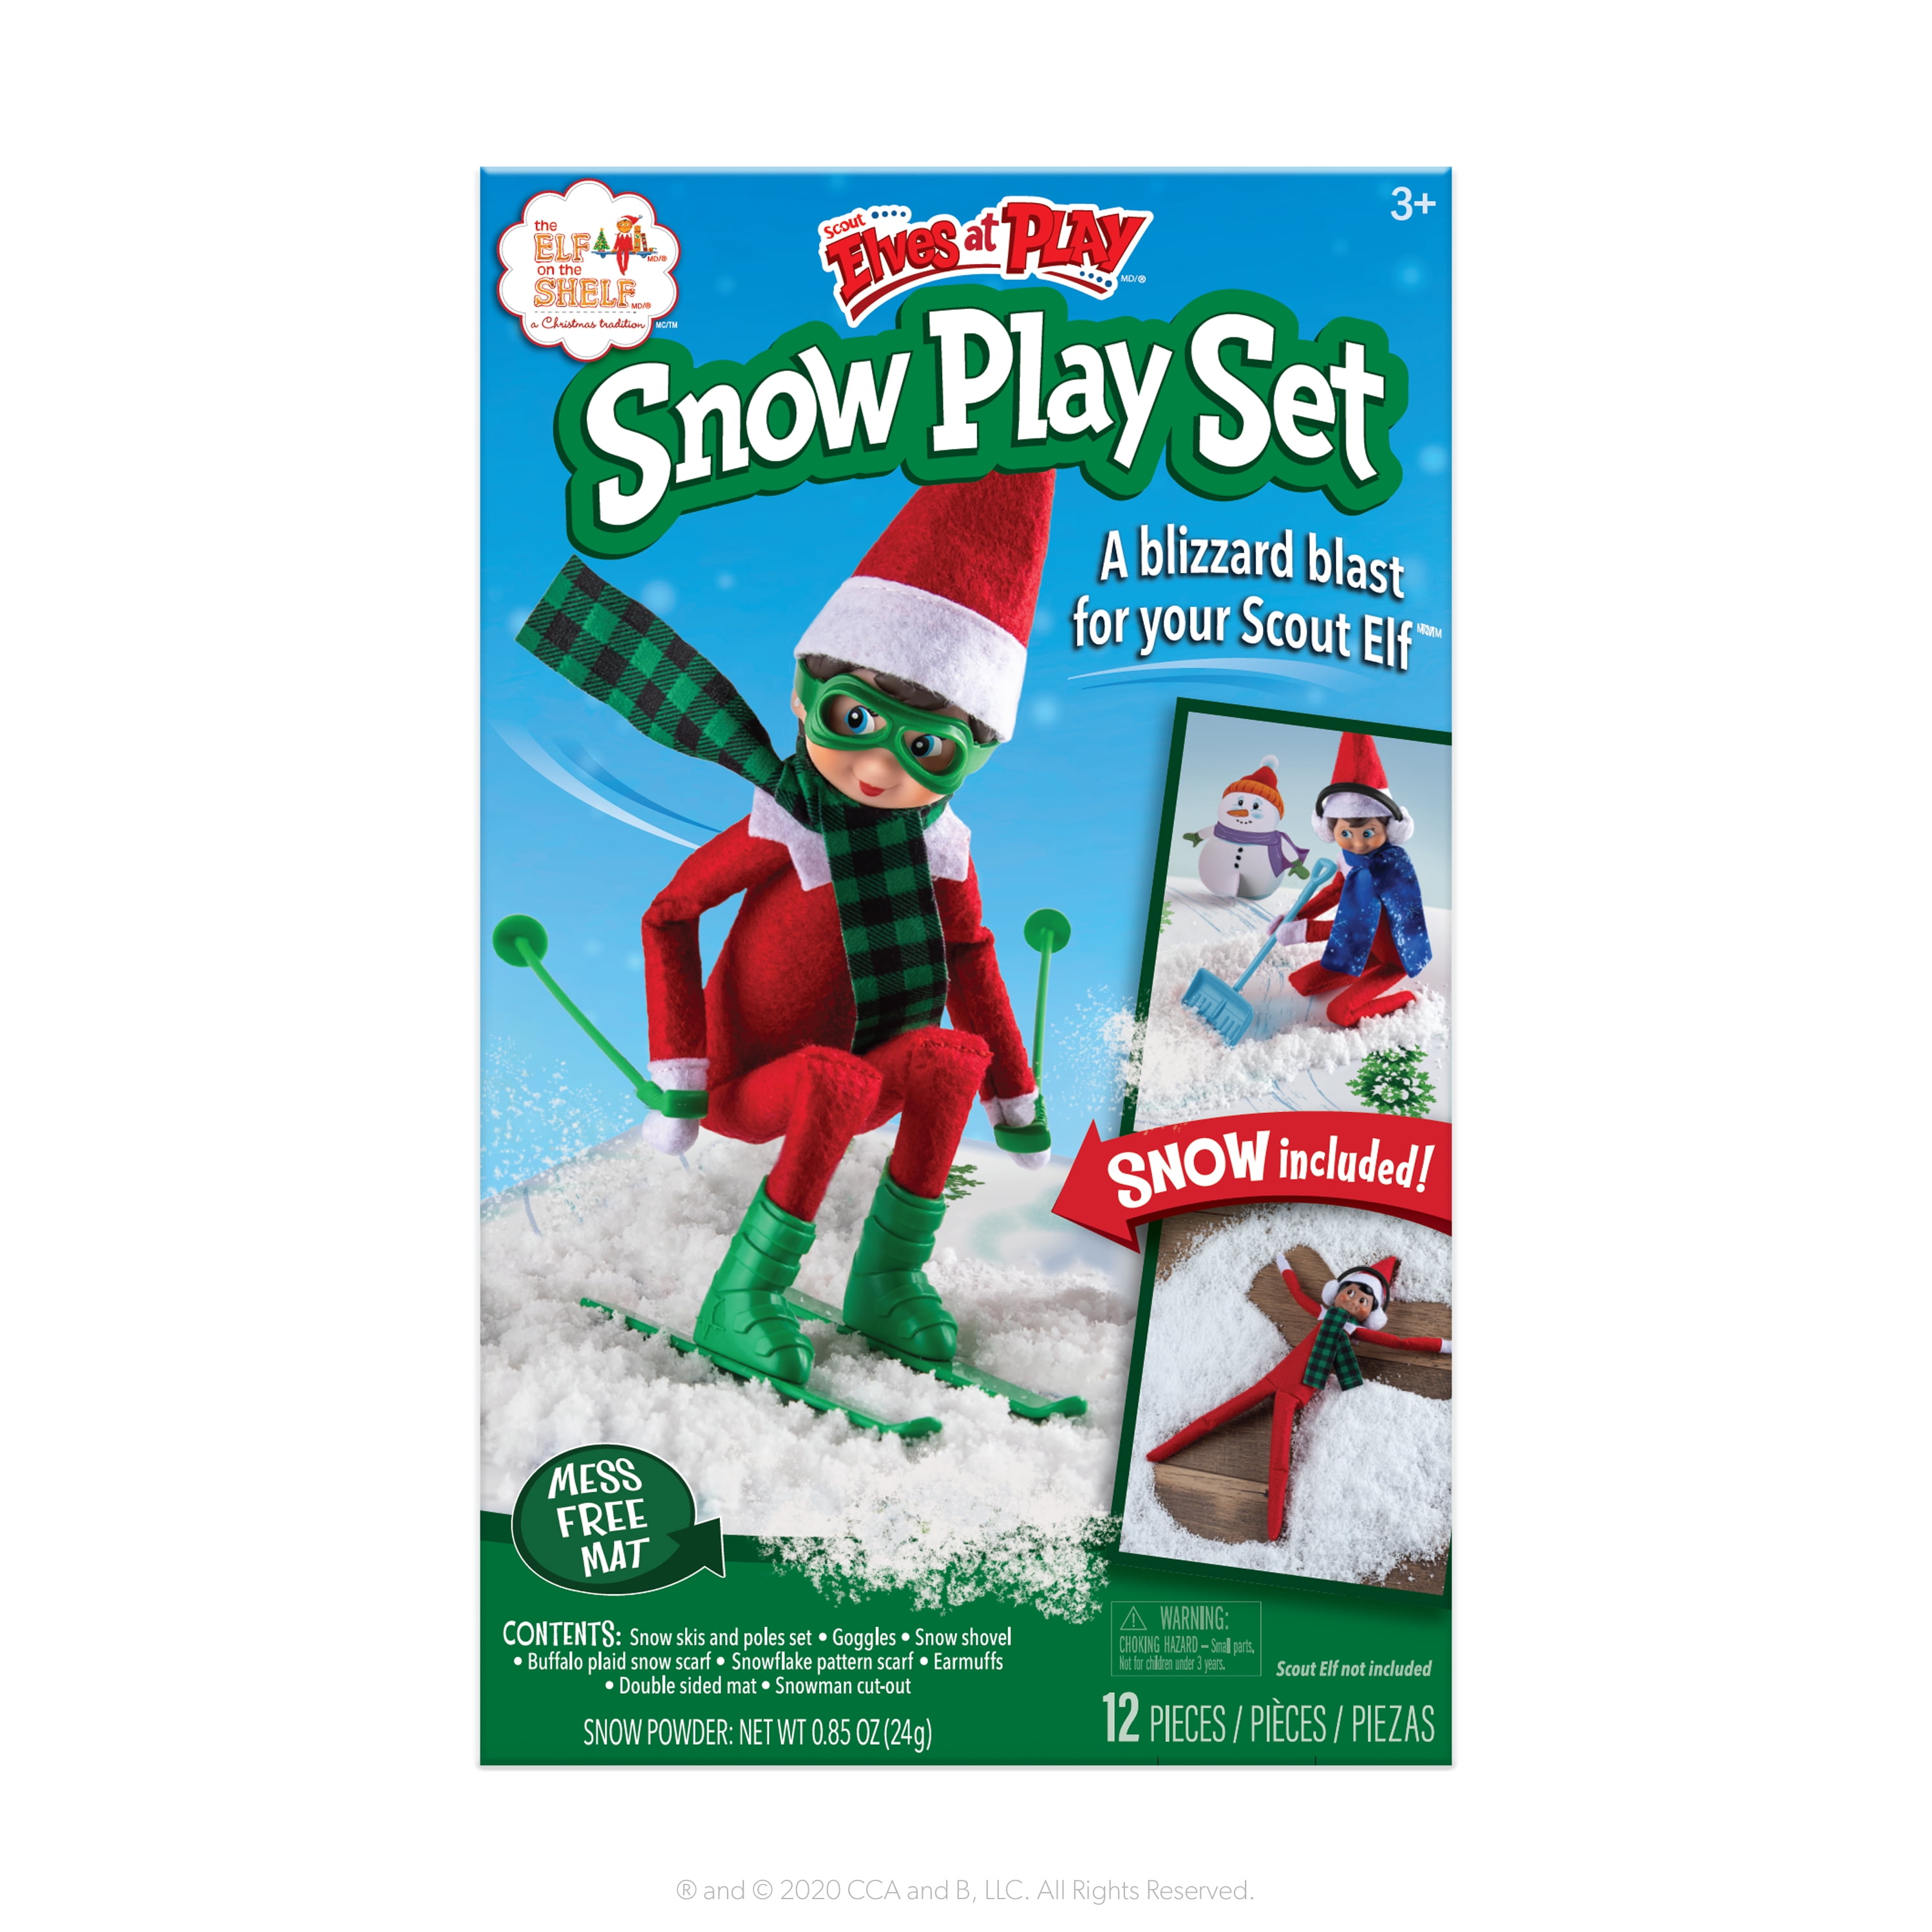 Scout Elves at Play Peppermint Plane RideElf on the Shelf AccessoriesElf 